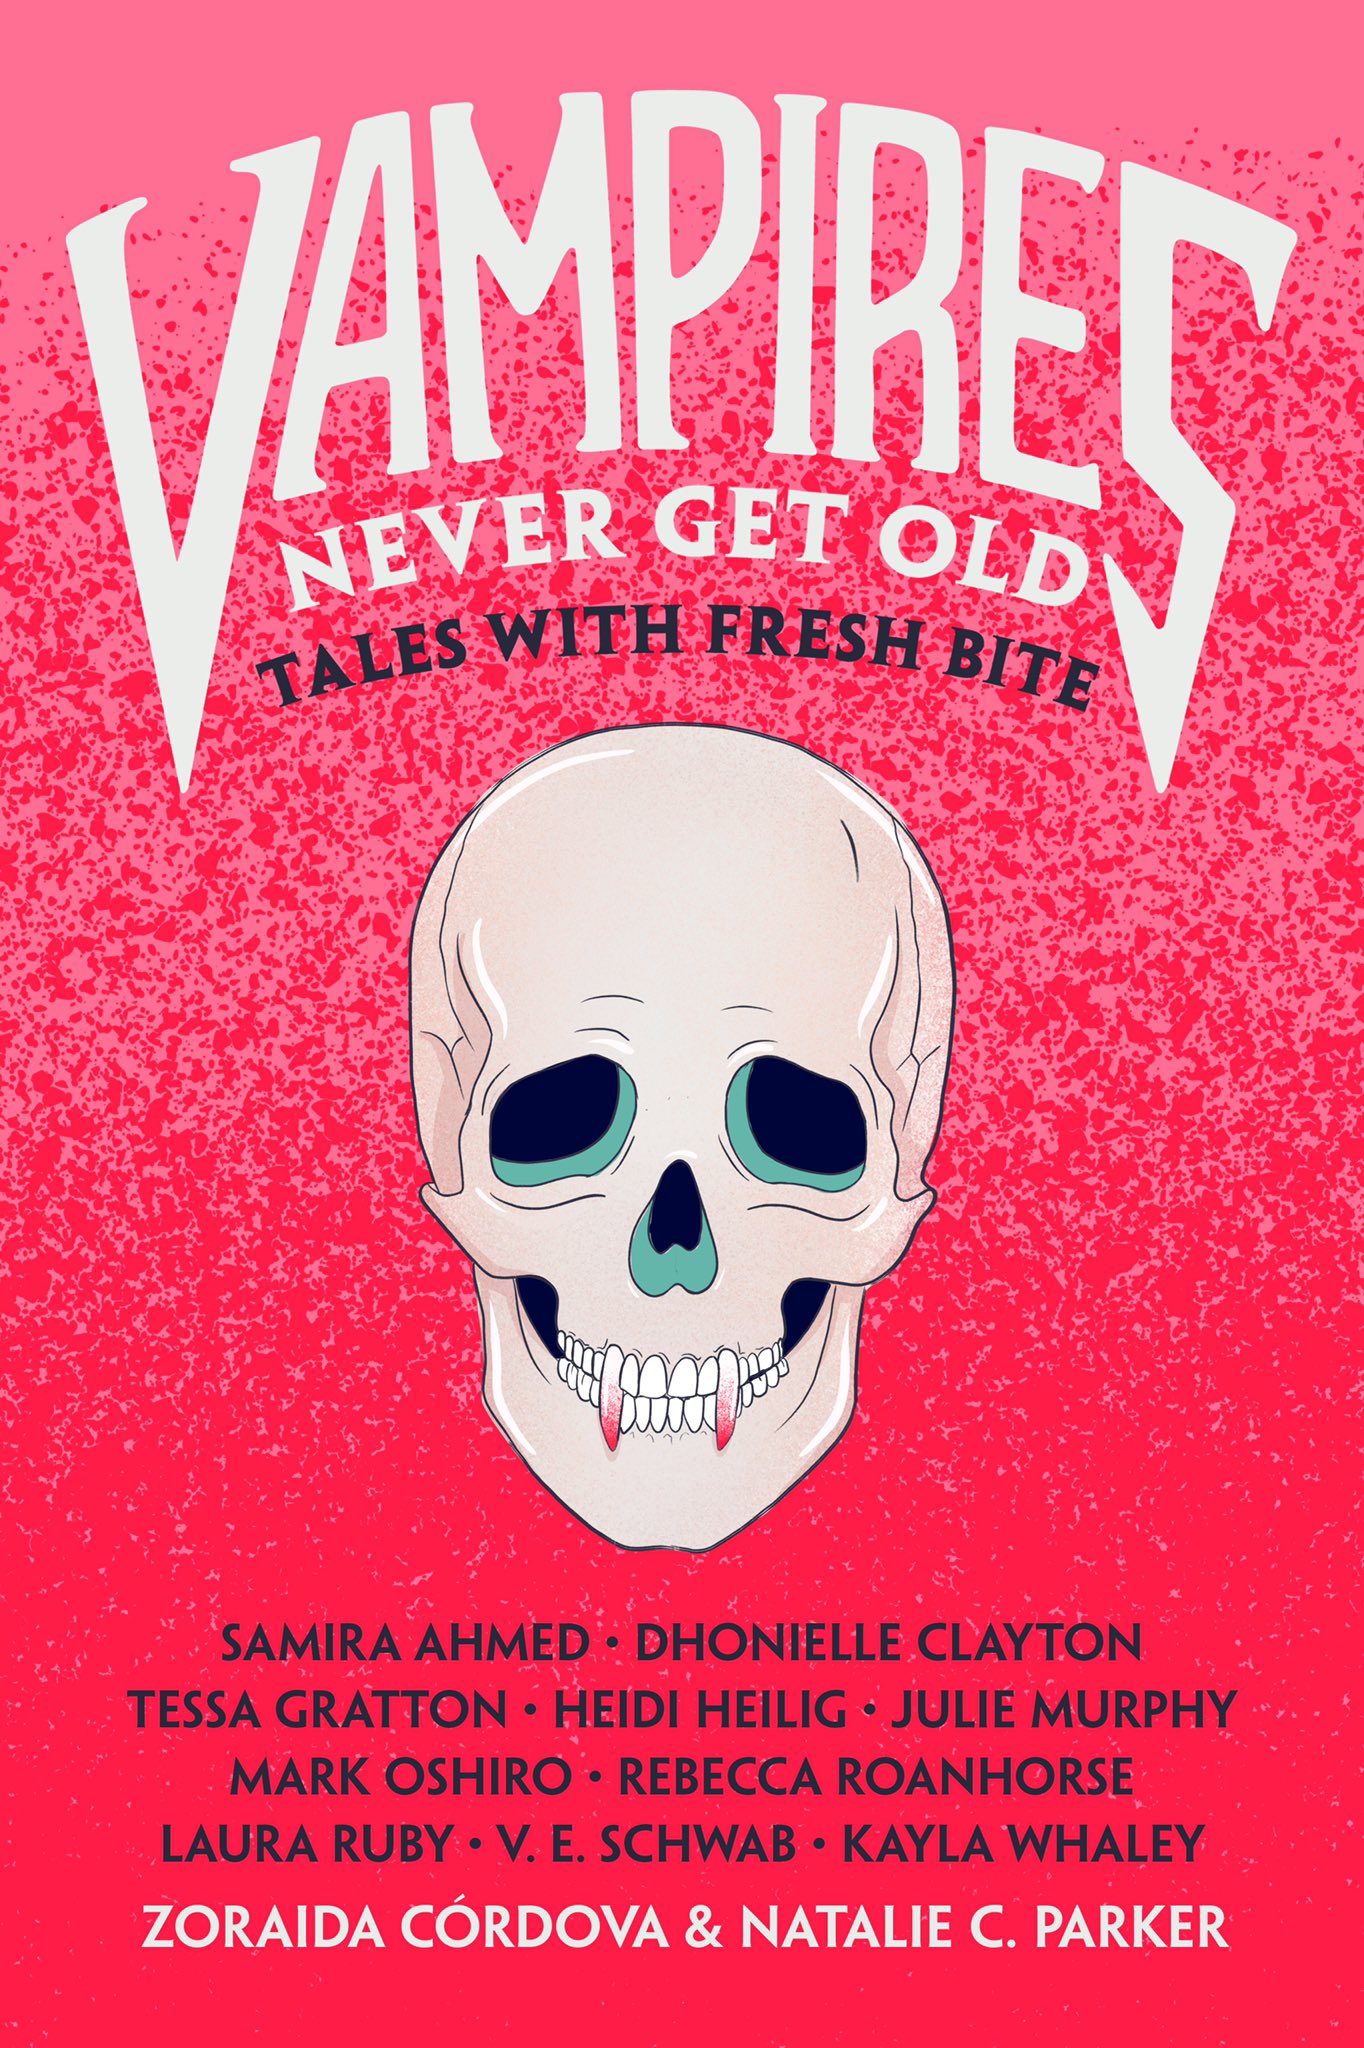 Vampires Never Get Old cover, which is pink with a skull